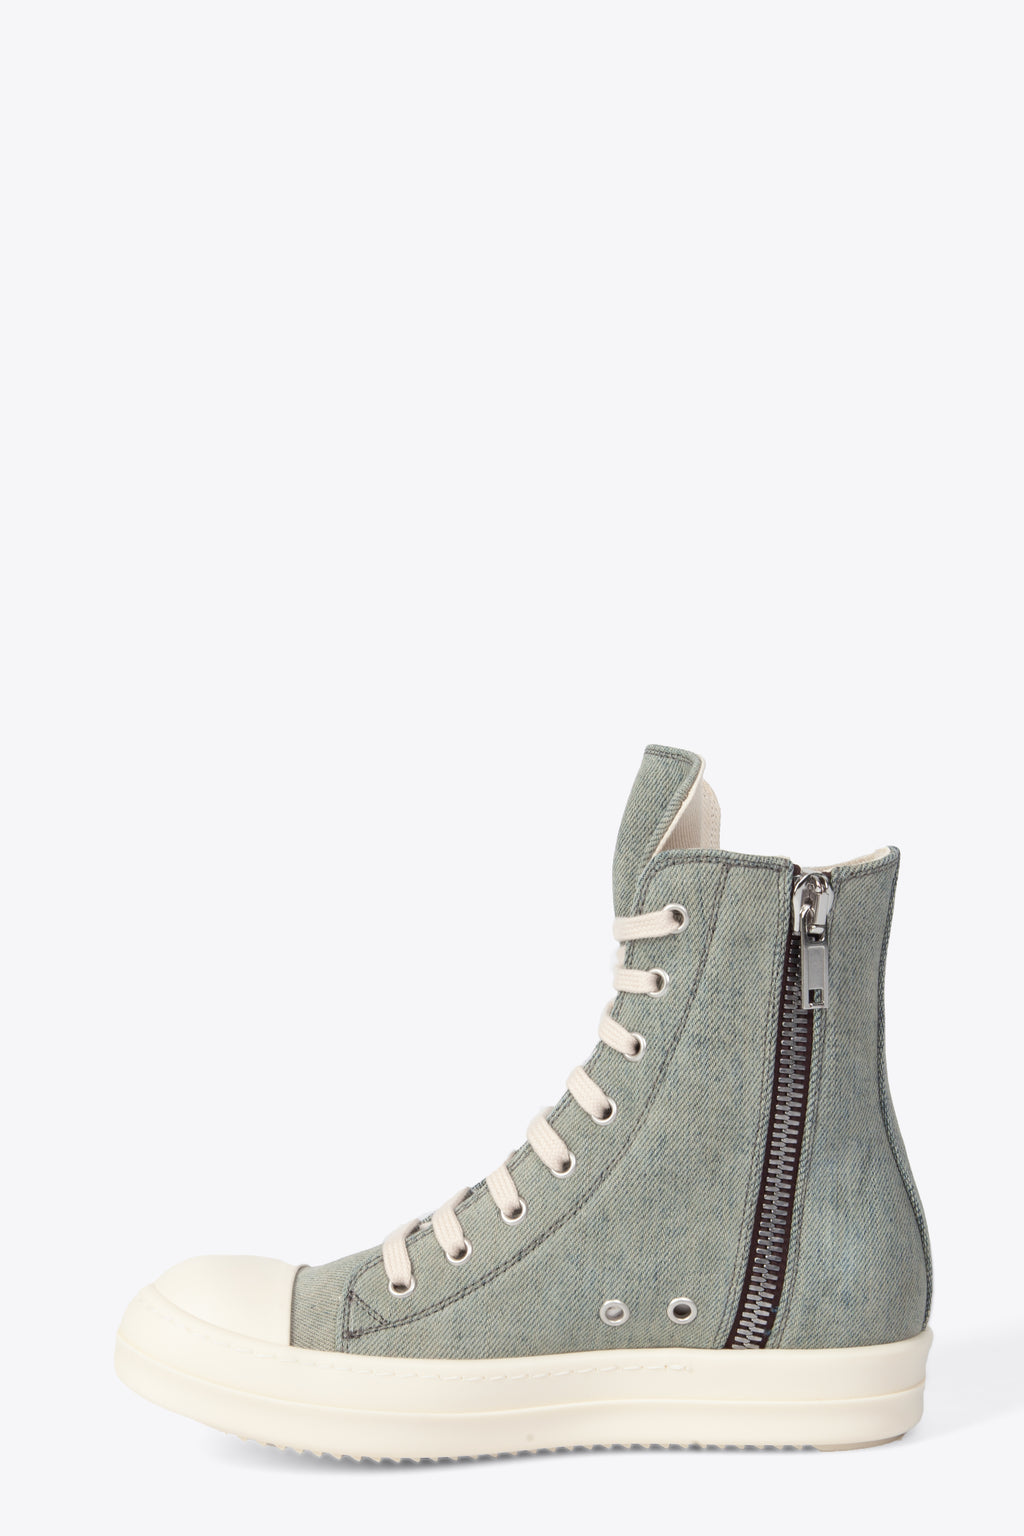 alt-image__Mineral-ripped-denim-lace-up-high-sneaker---Hi-sneaks